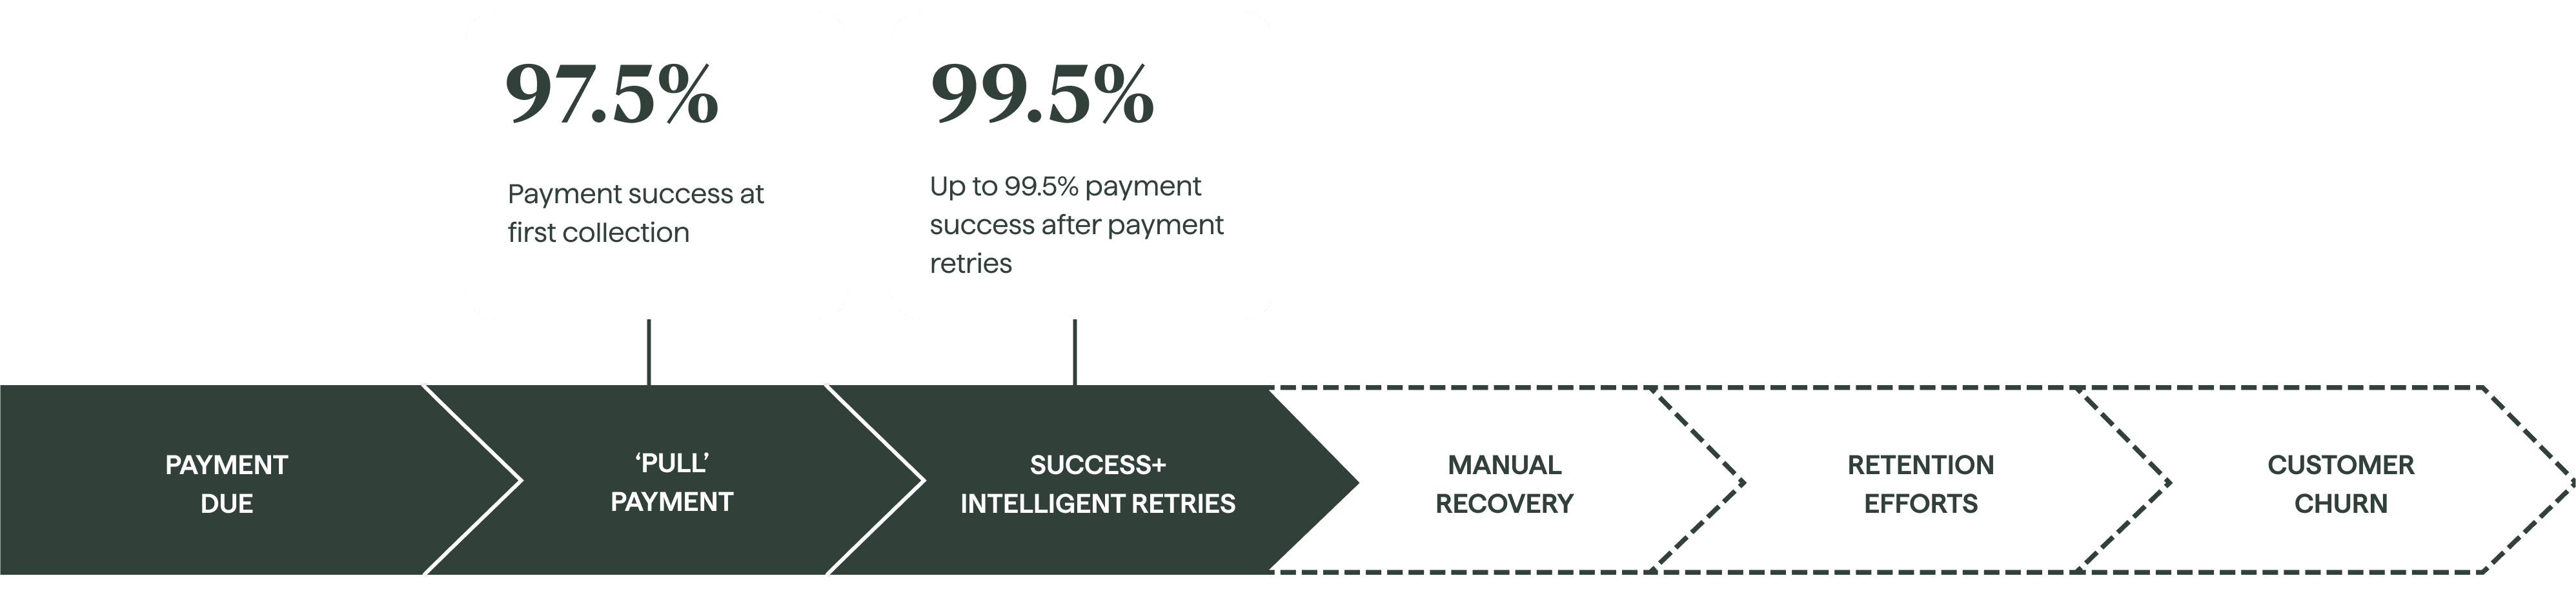 Reduce failed payments to as low as 0.5%